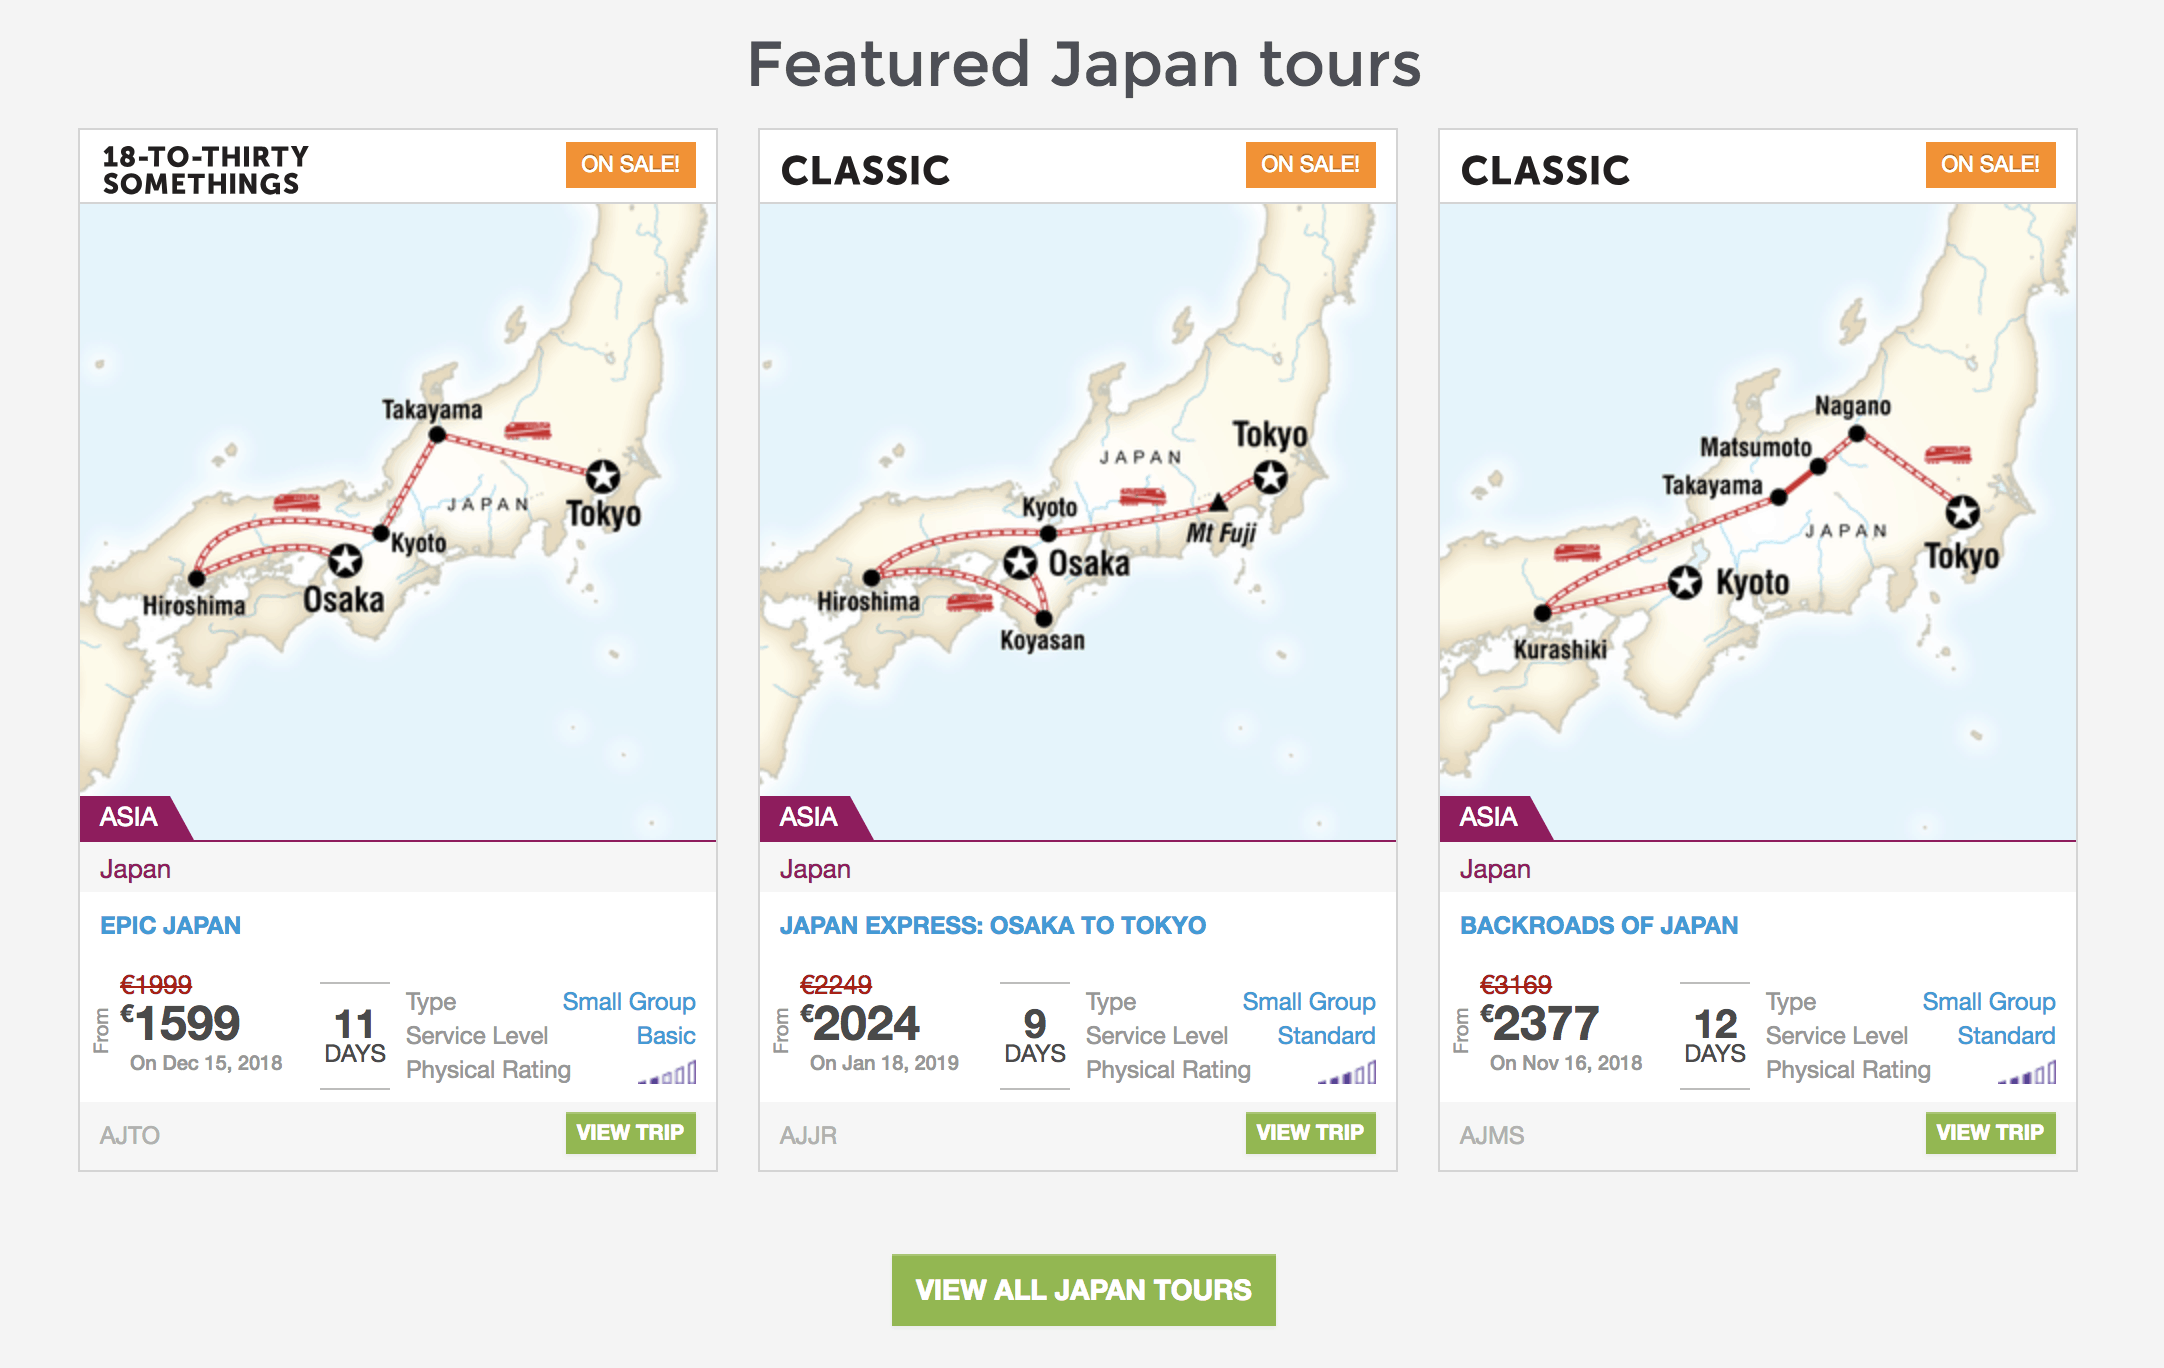 Maps showing tours of Japan